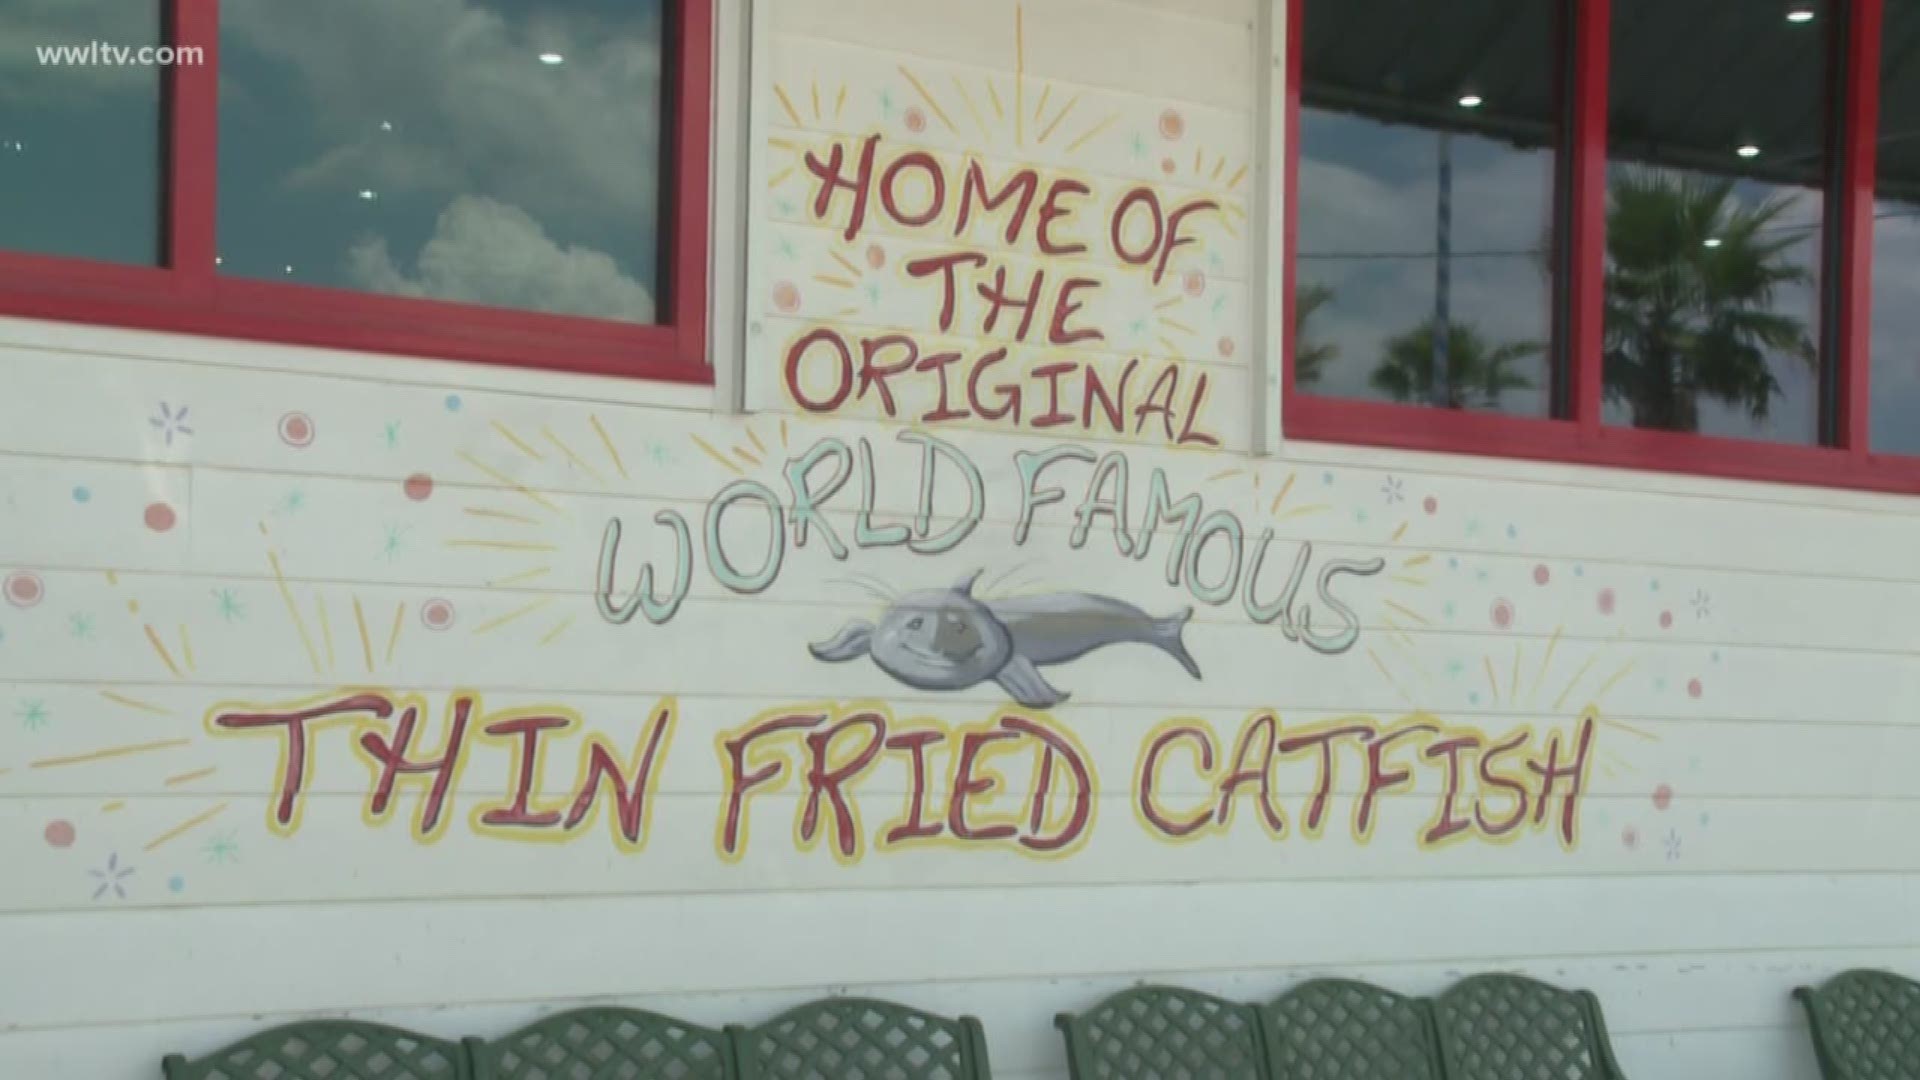 Access Code 70421: Middendorf's, home of the world-famous thin-fried catfish